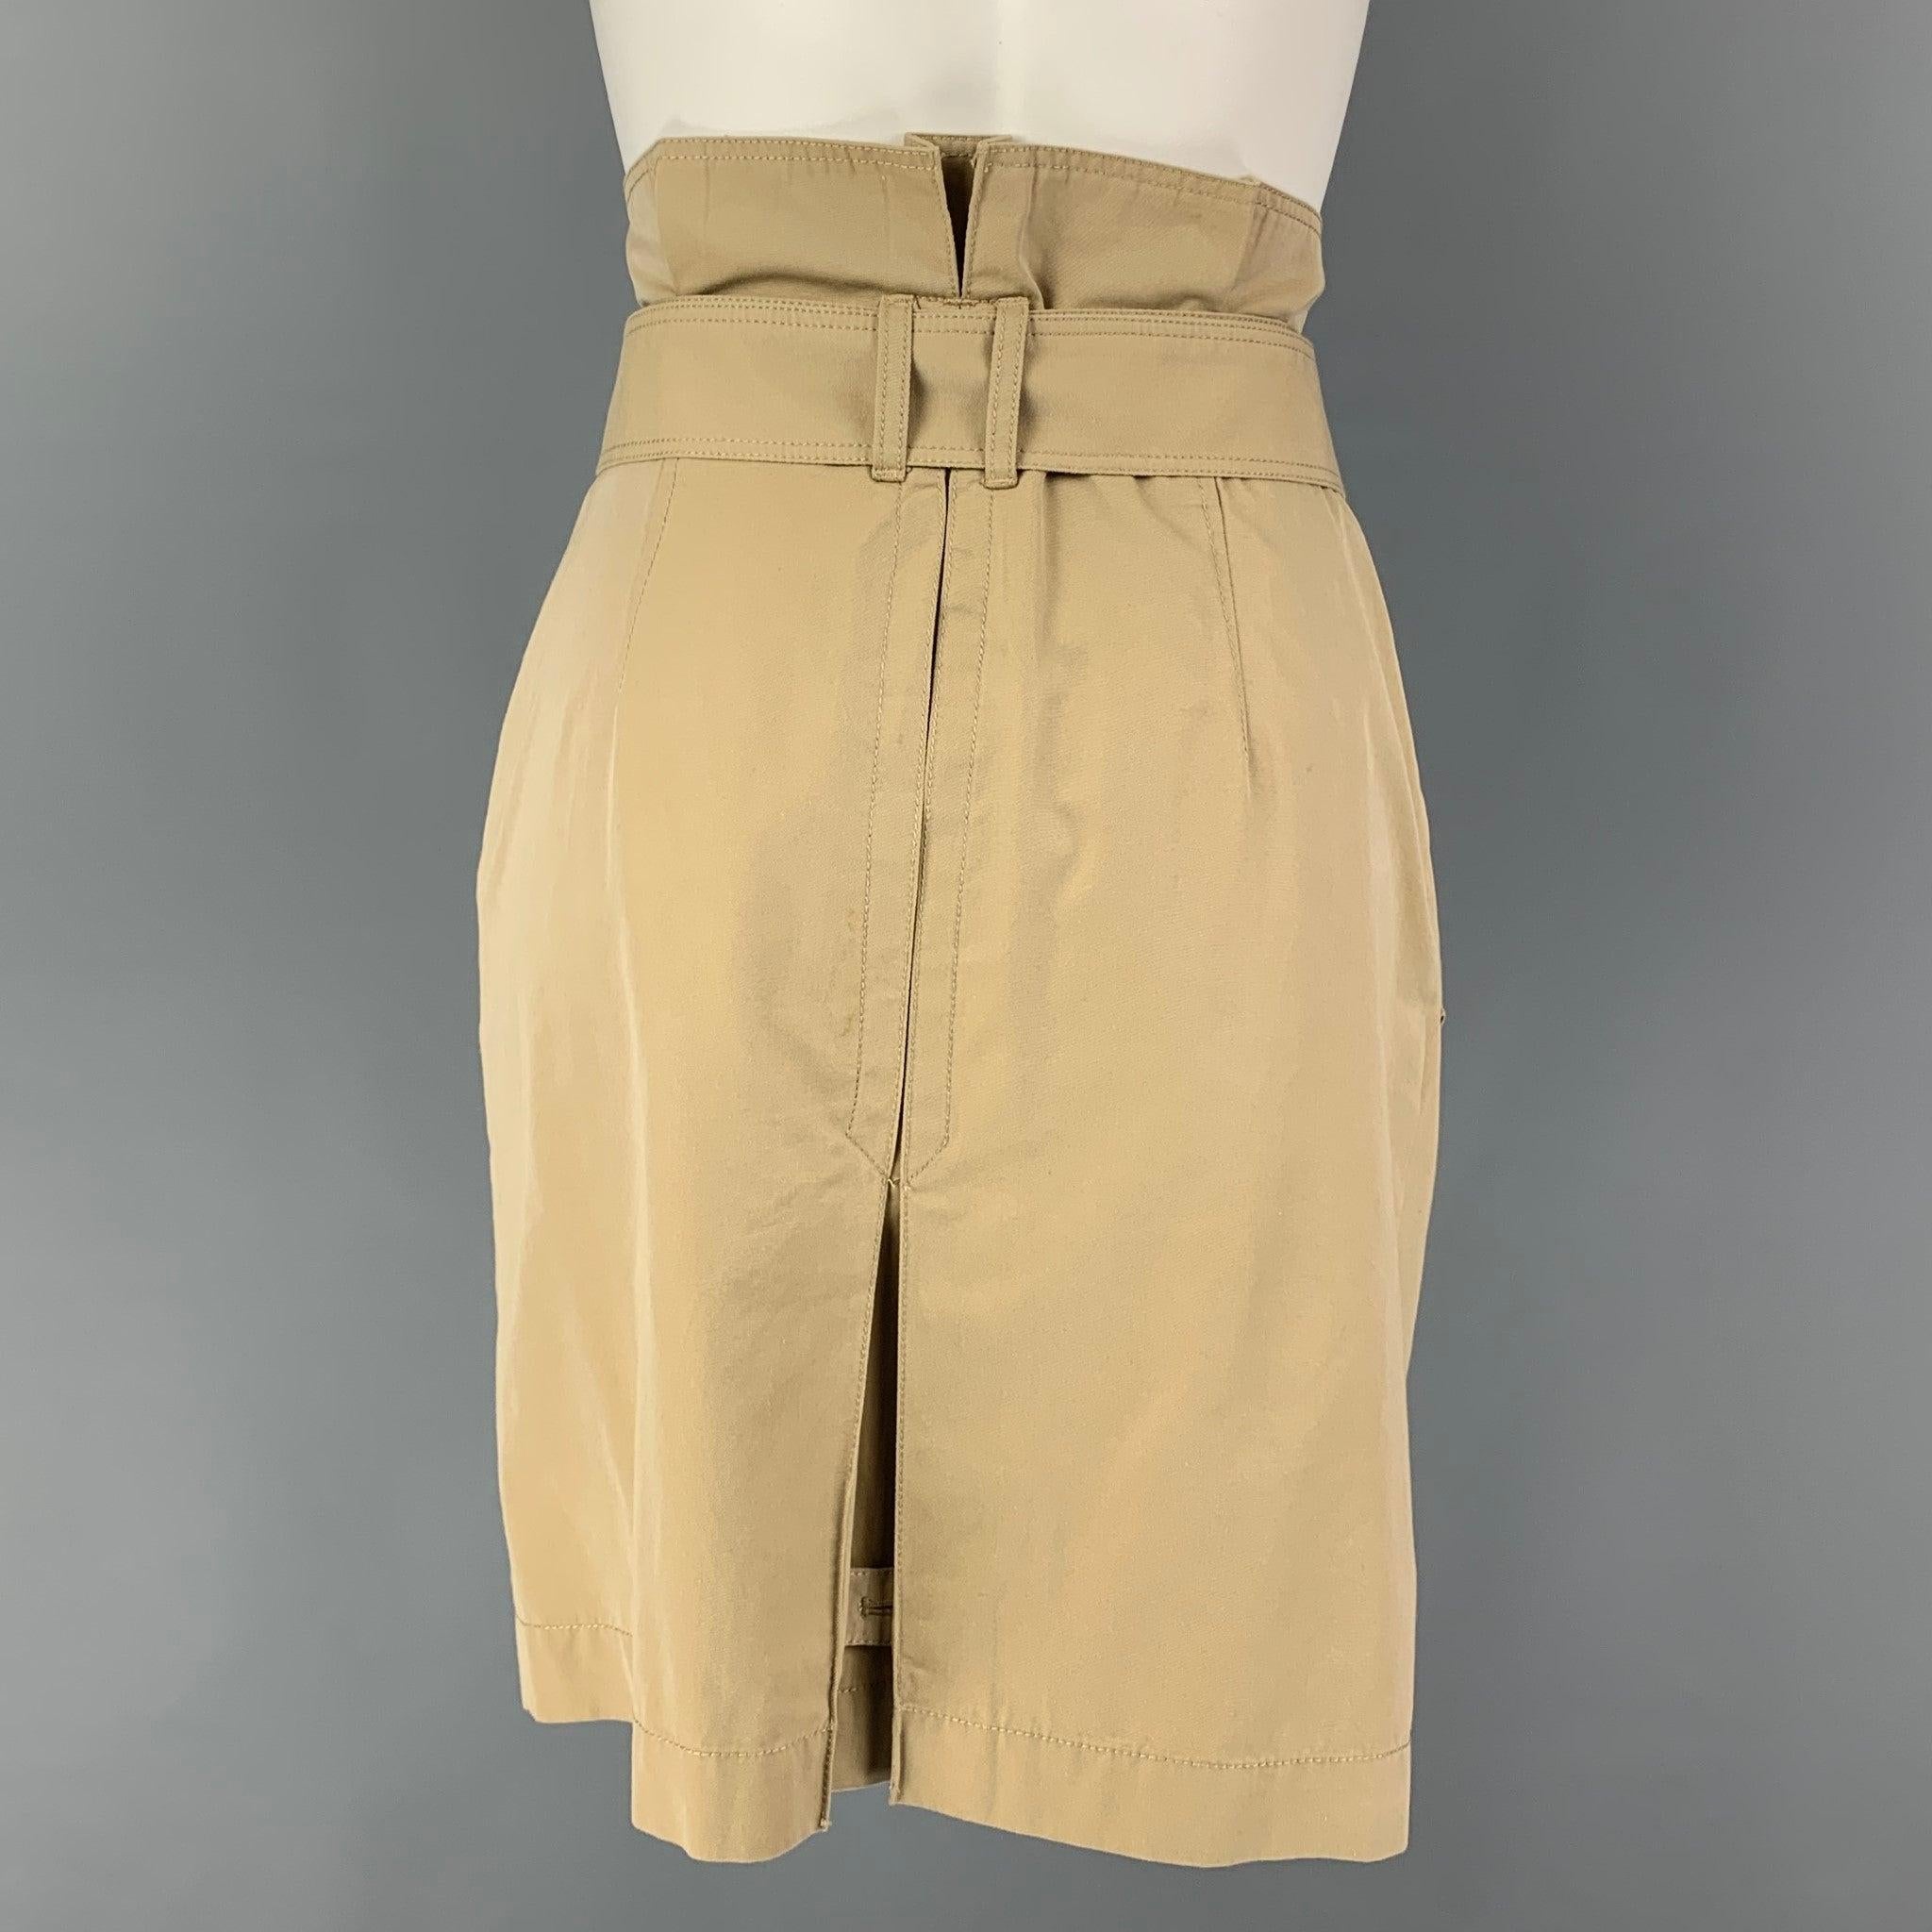 BURBERRY BRIT Size 6 Khaki Cotton Double Breasted Belted Skirt In Good Condition For Sale In San Francisco, CA